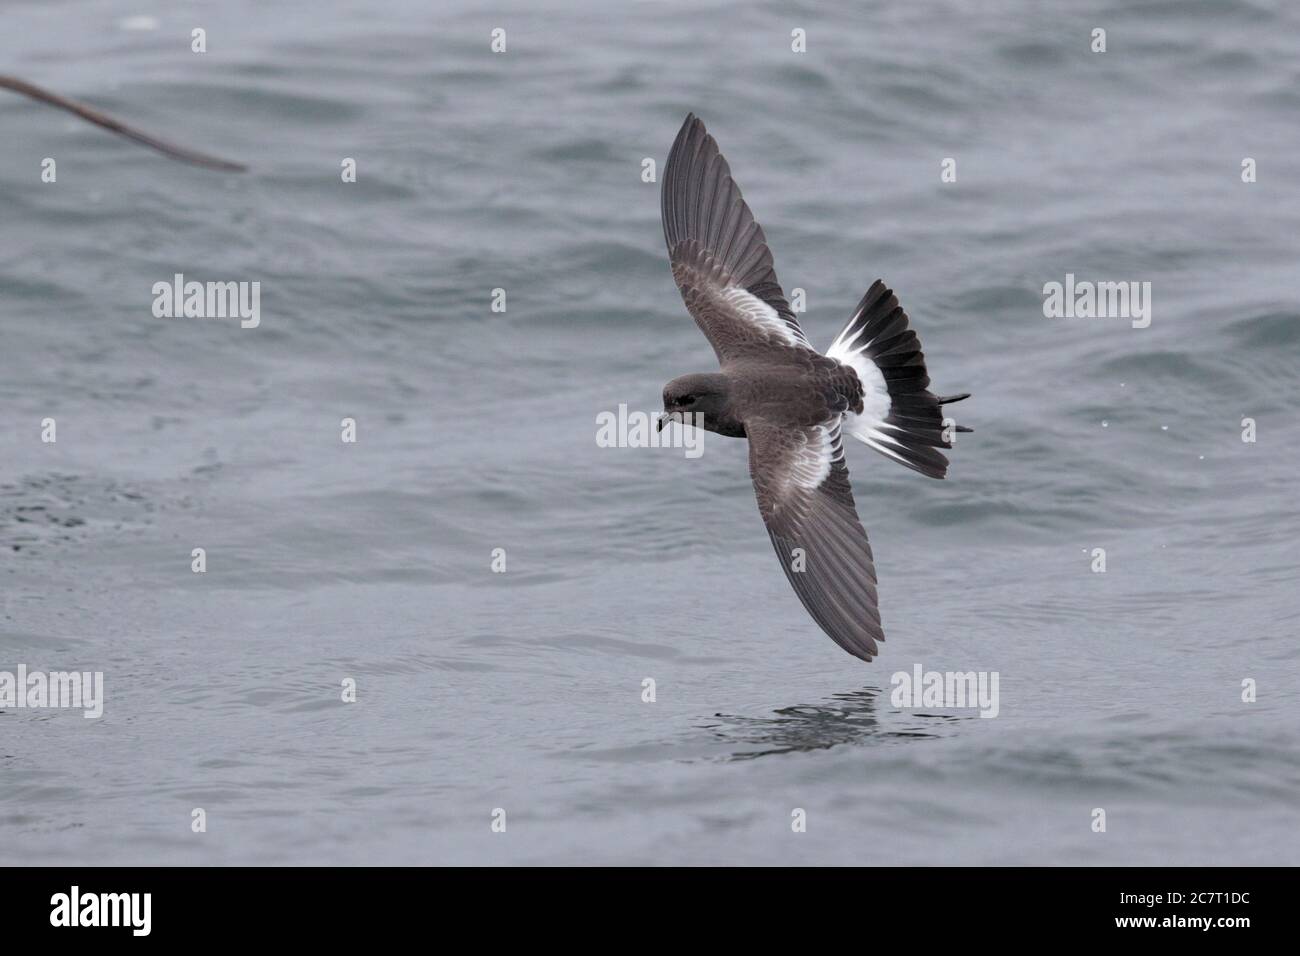 Pincoya Storm-Petrel (Oceanites pincoyae), dorsal view flying over sea surface in Gulf of Ancud, Puerto Montt, south Chile 24th Feb 2020 Stock Photo